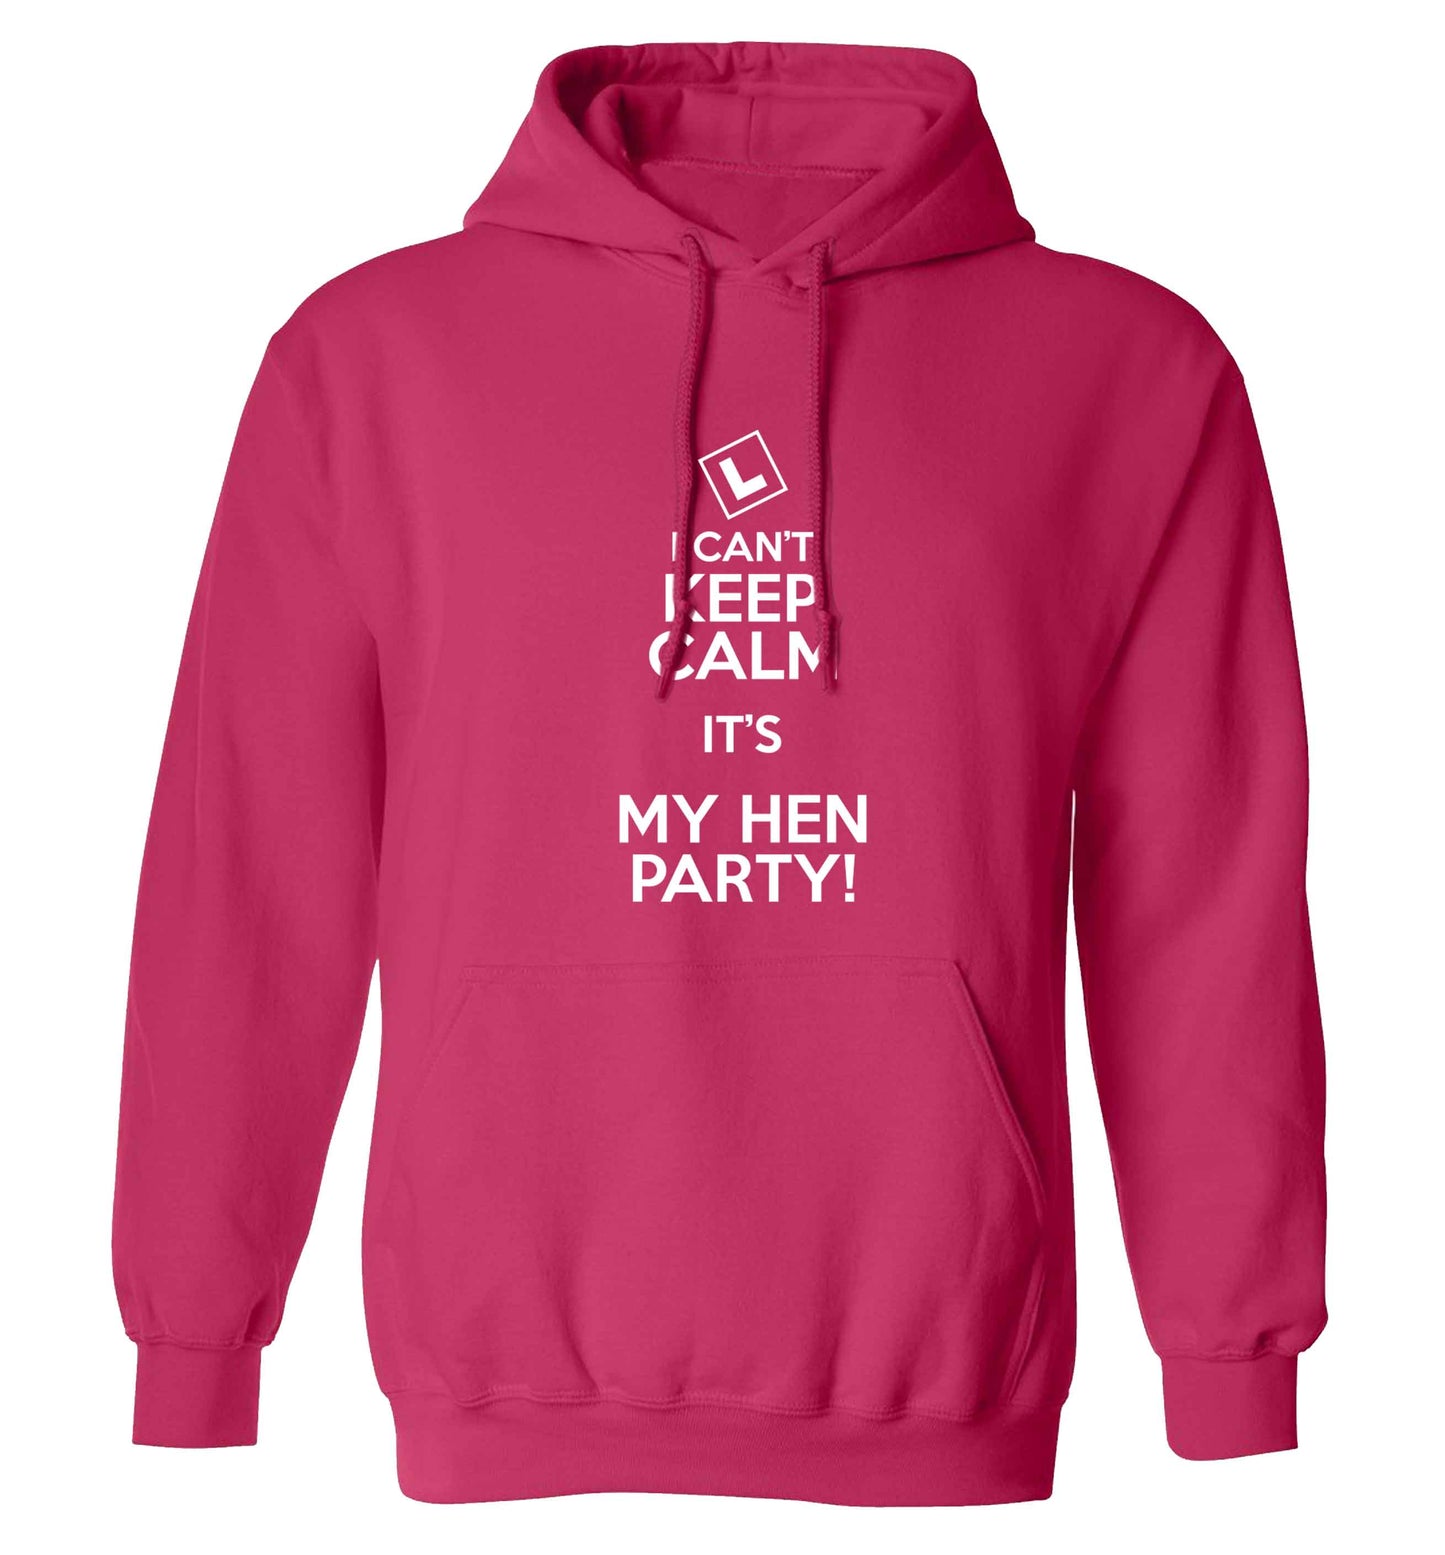 I can't keep calm it's my hen party adults unisex pink hoodie 2XL